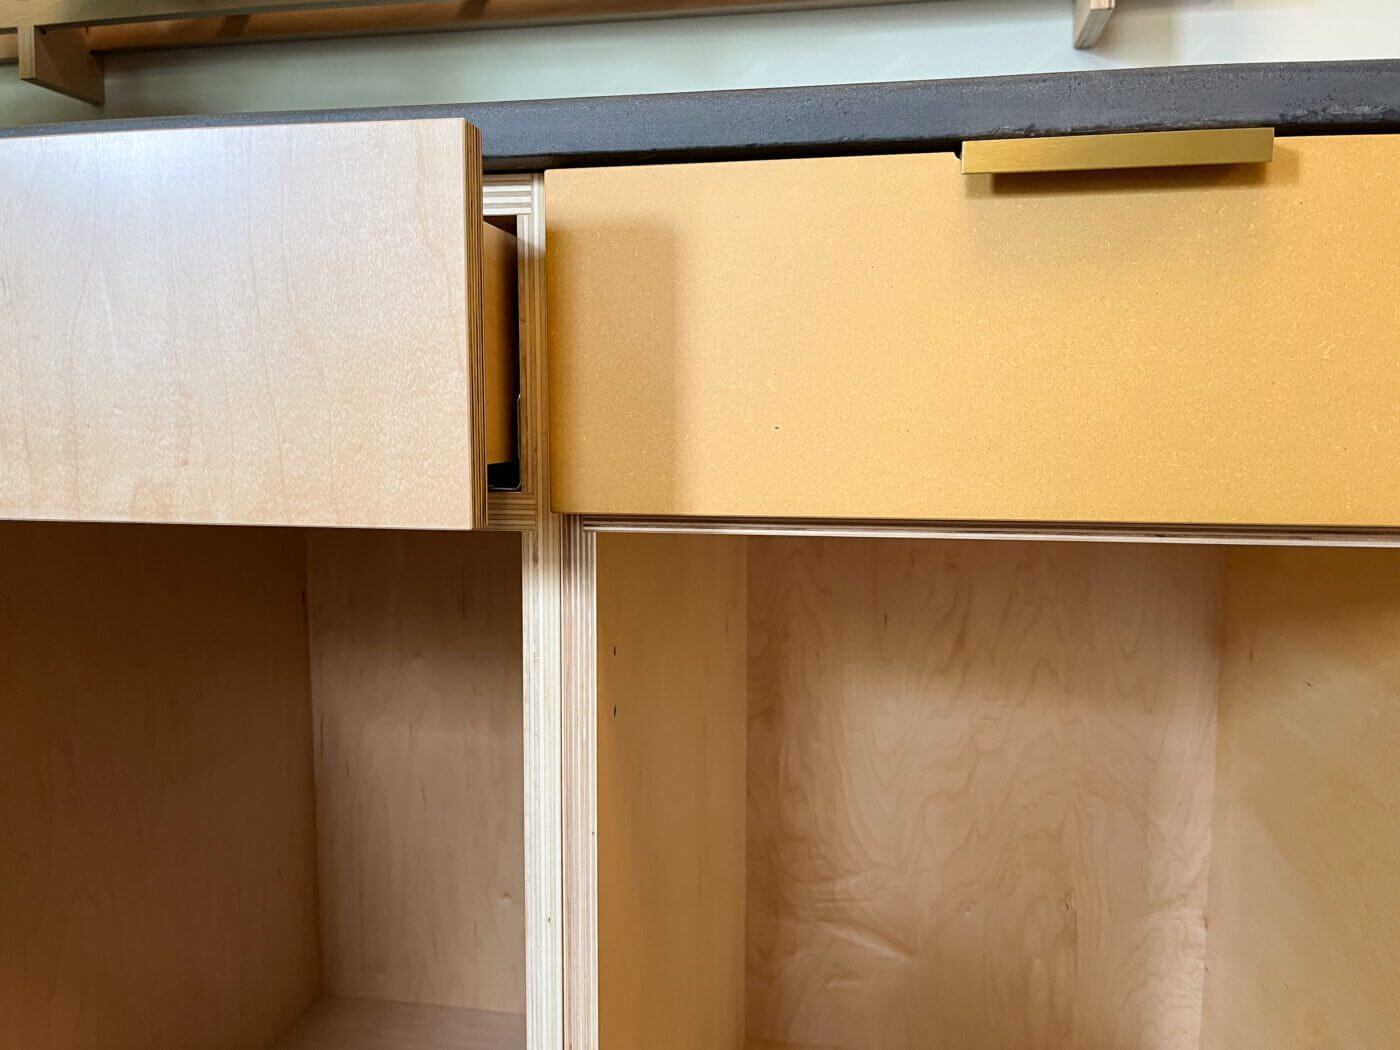 Our cabinets are made without edge banding, and designed to show off the beautiful edges of our high-quality plywood cases and fronts. The cabinet on the left shows a clear-coated maple veneer finish, while the cabinet on the left is our "Butternut Squash" custom color finish over Medex. 